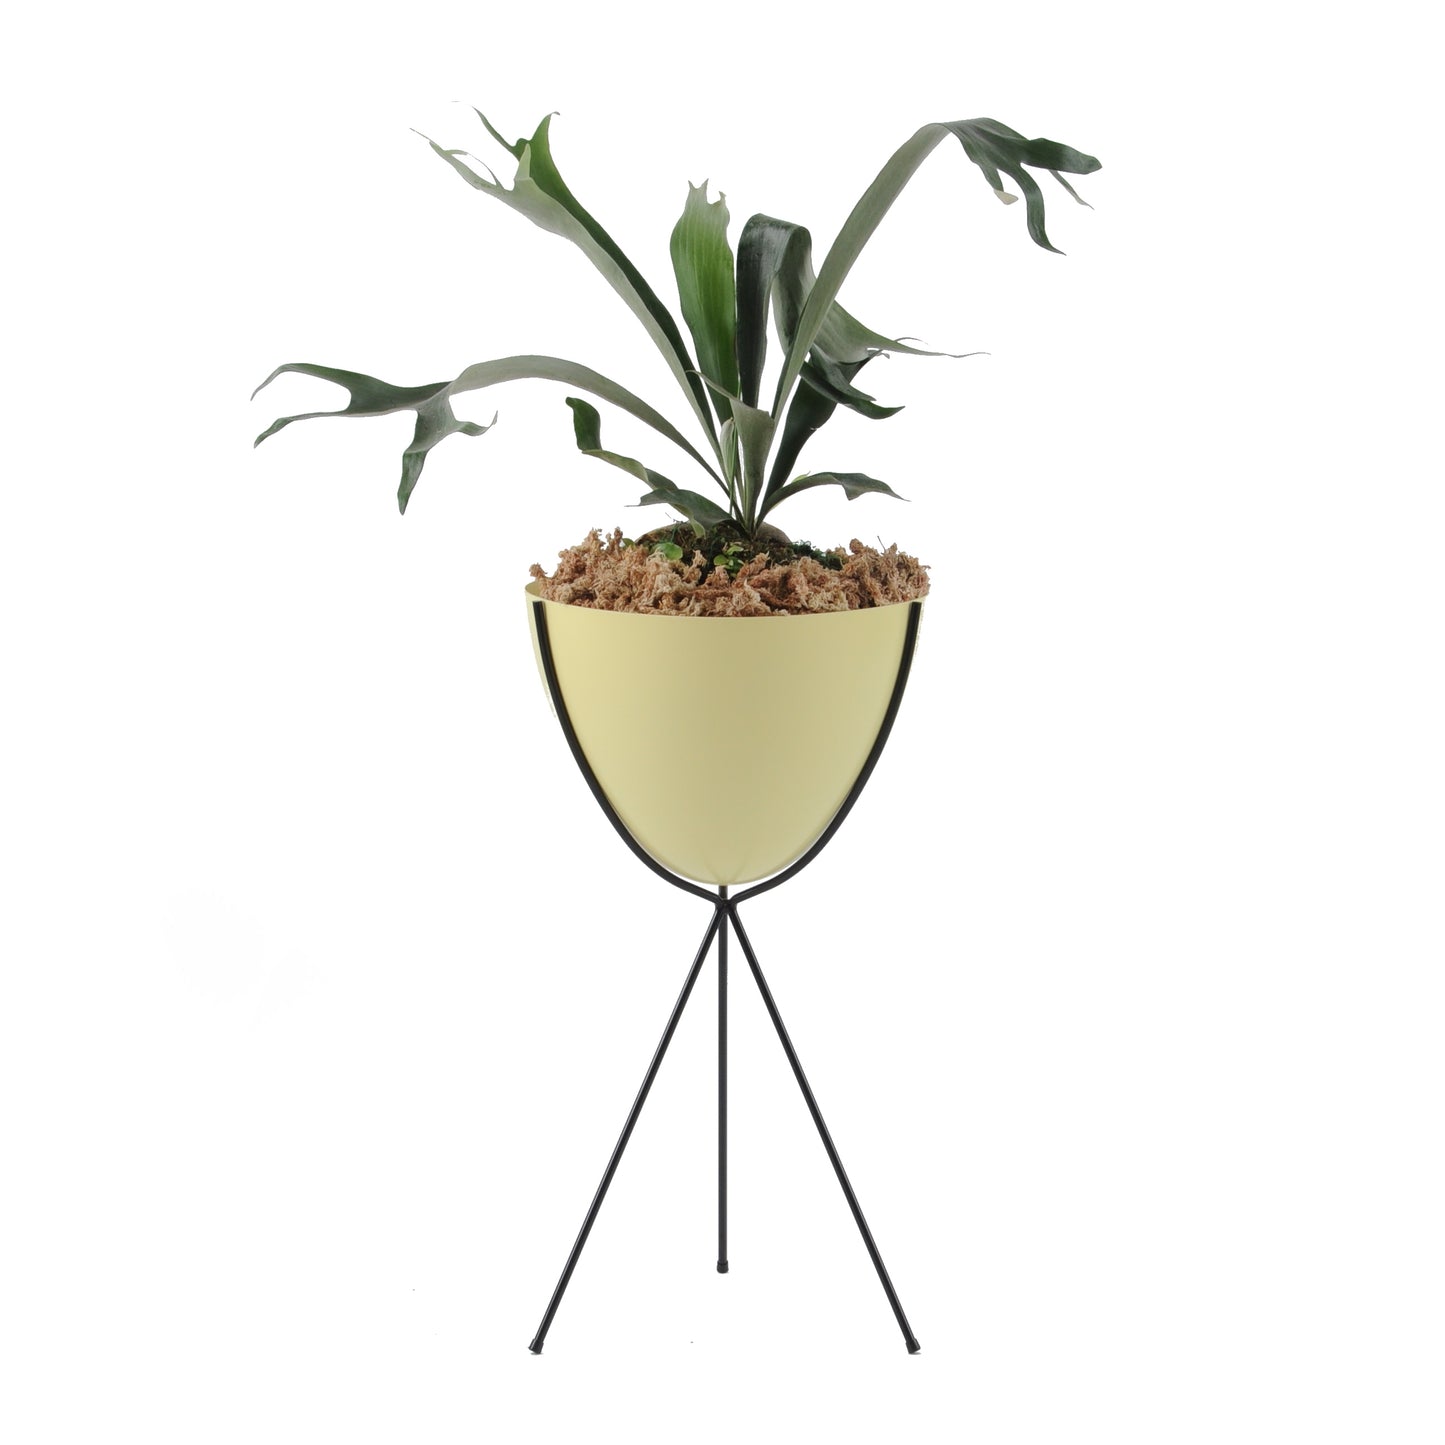 Retro Bullet Planter by Hip Haven™ – Tall